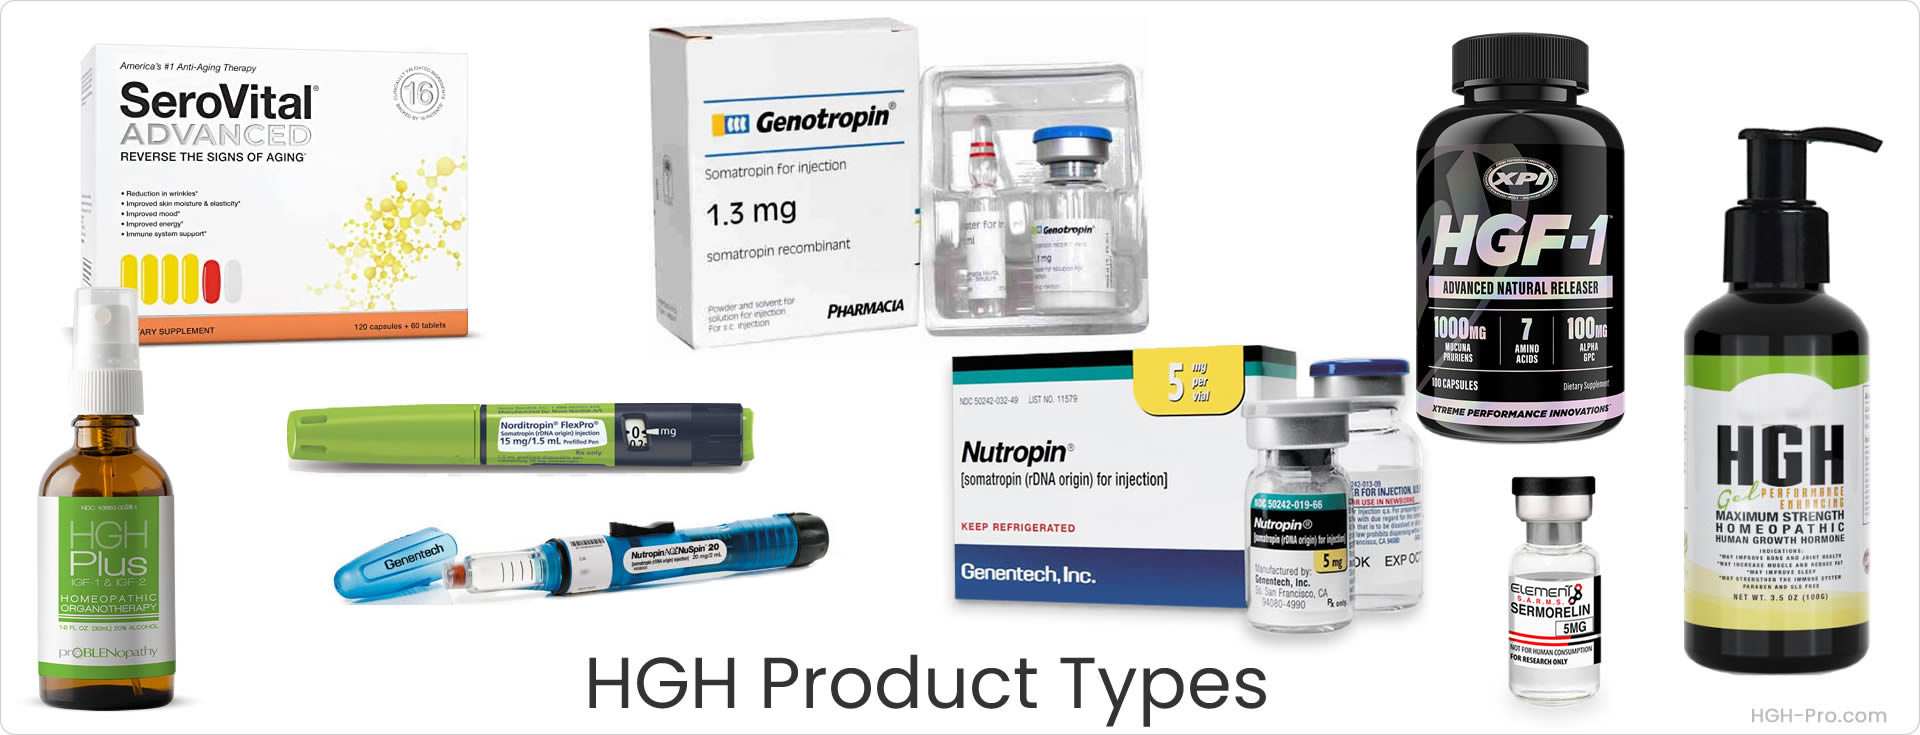 Types of HGH products